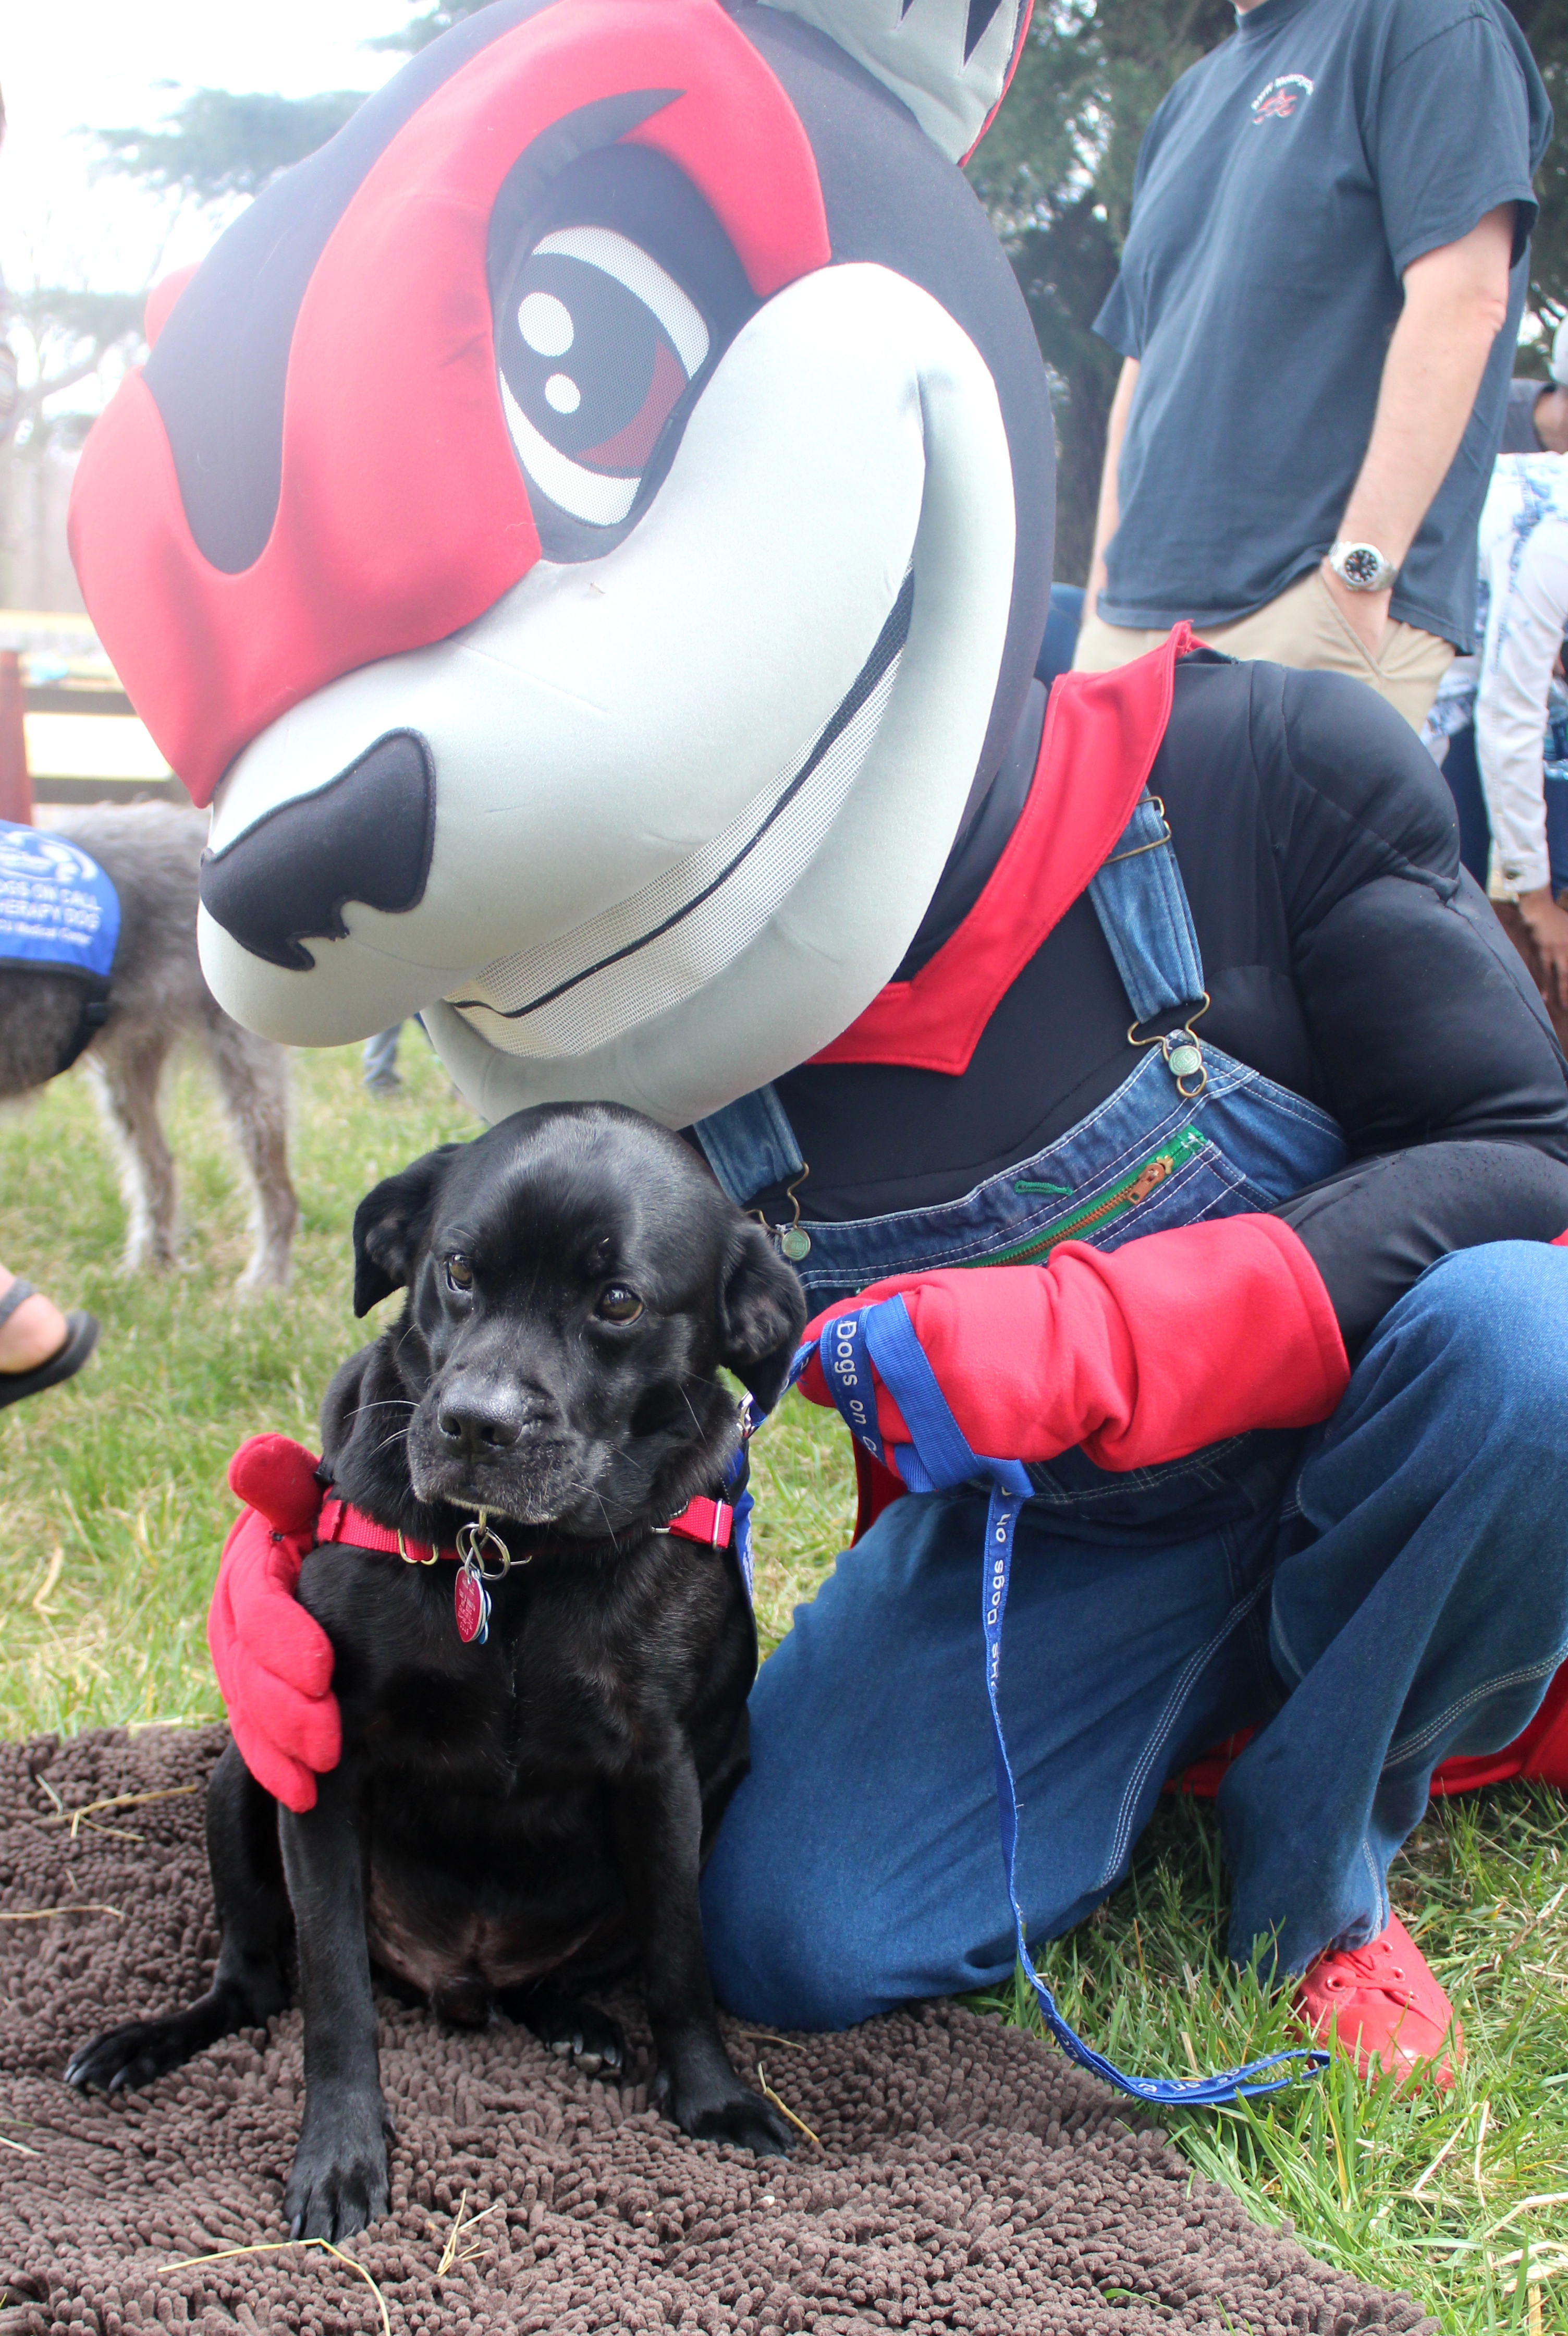 Dogs On Call therapy dog Otis, a black lab and pug mix, poses with the Richmond Squirrels Baseball team's mascot, Nutzy.